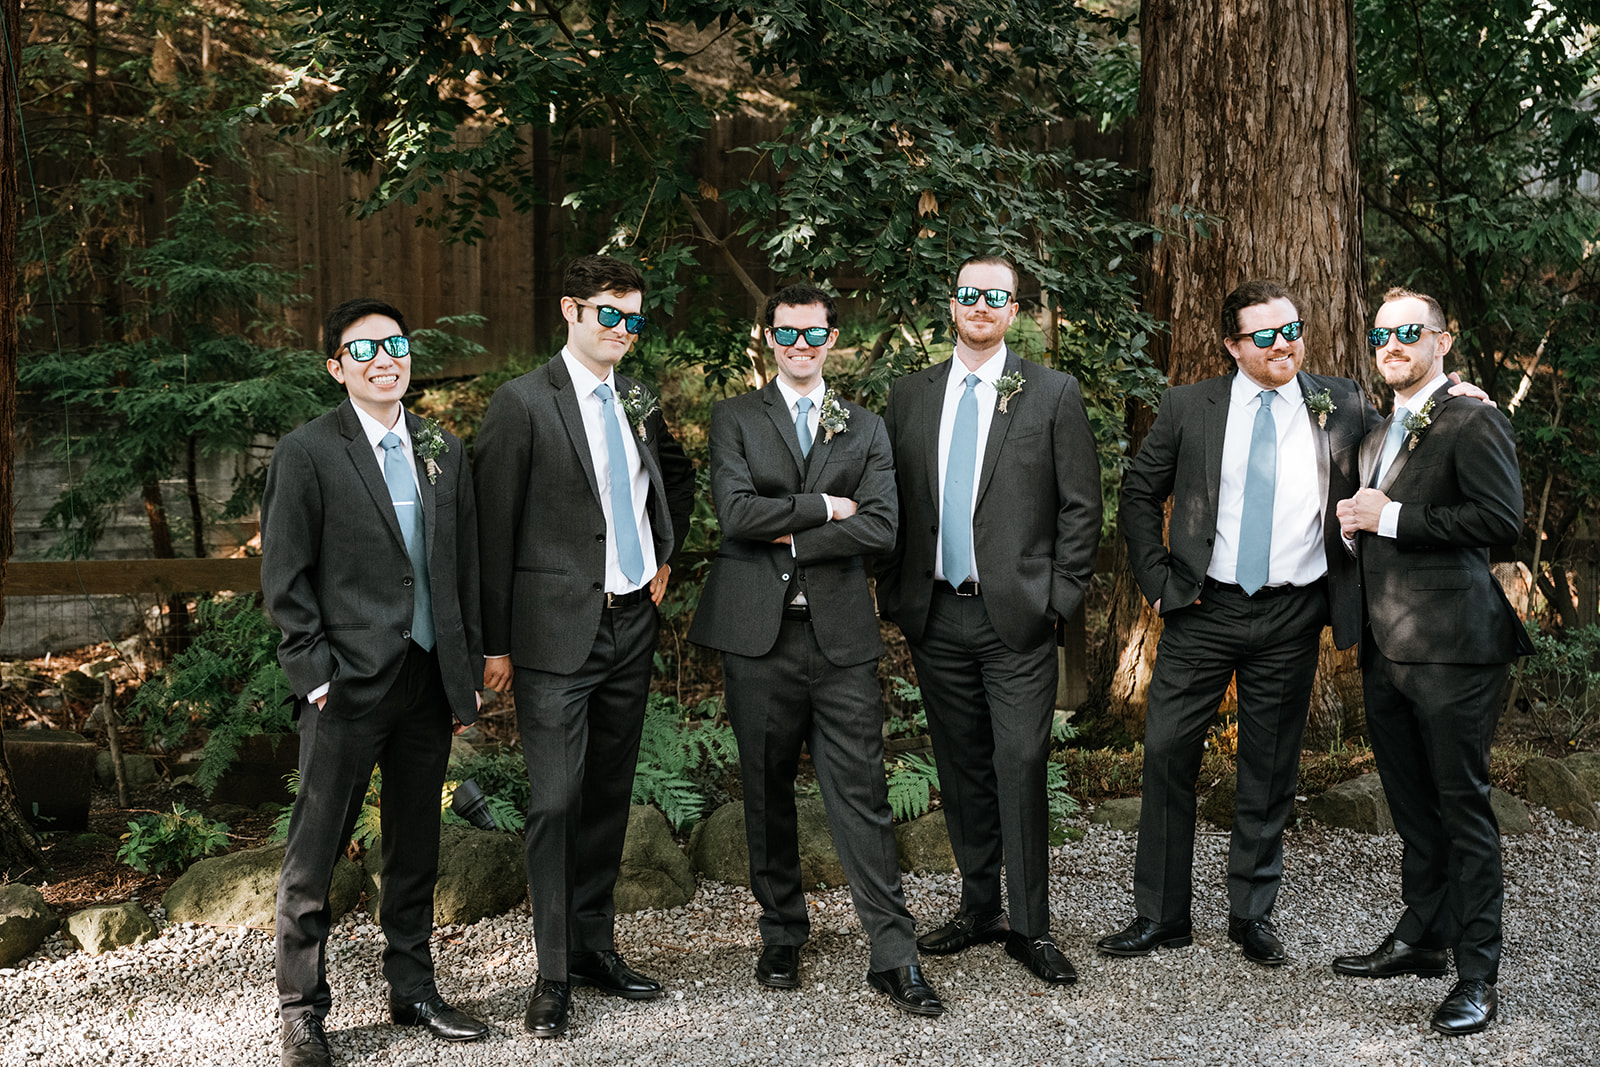 Groomsmen acting silly